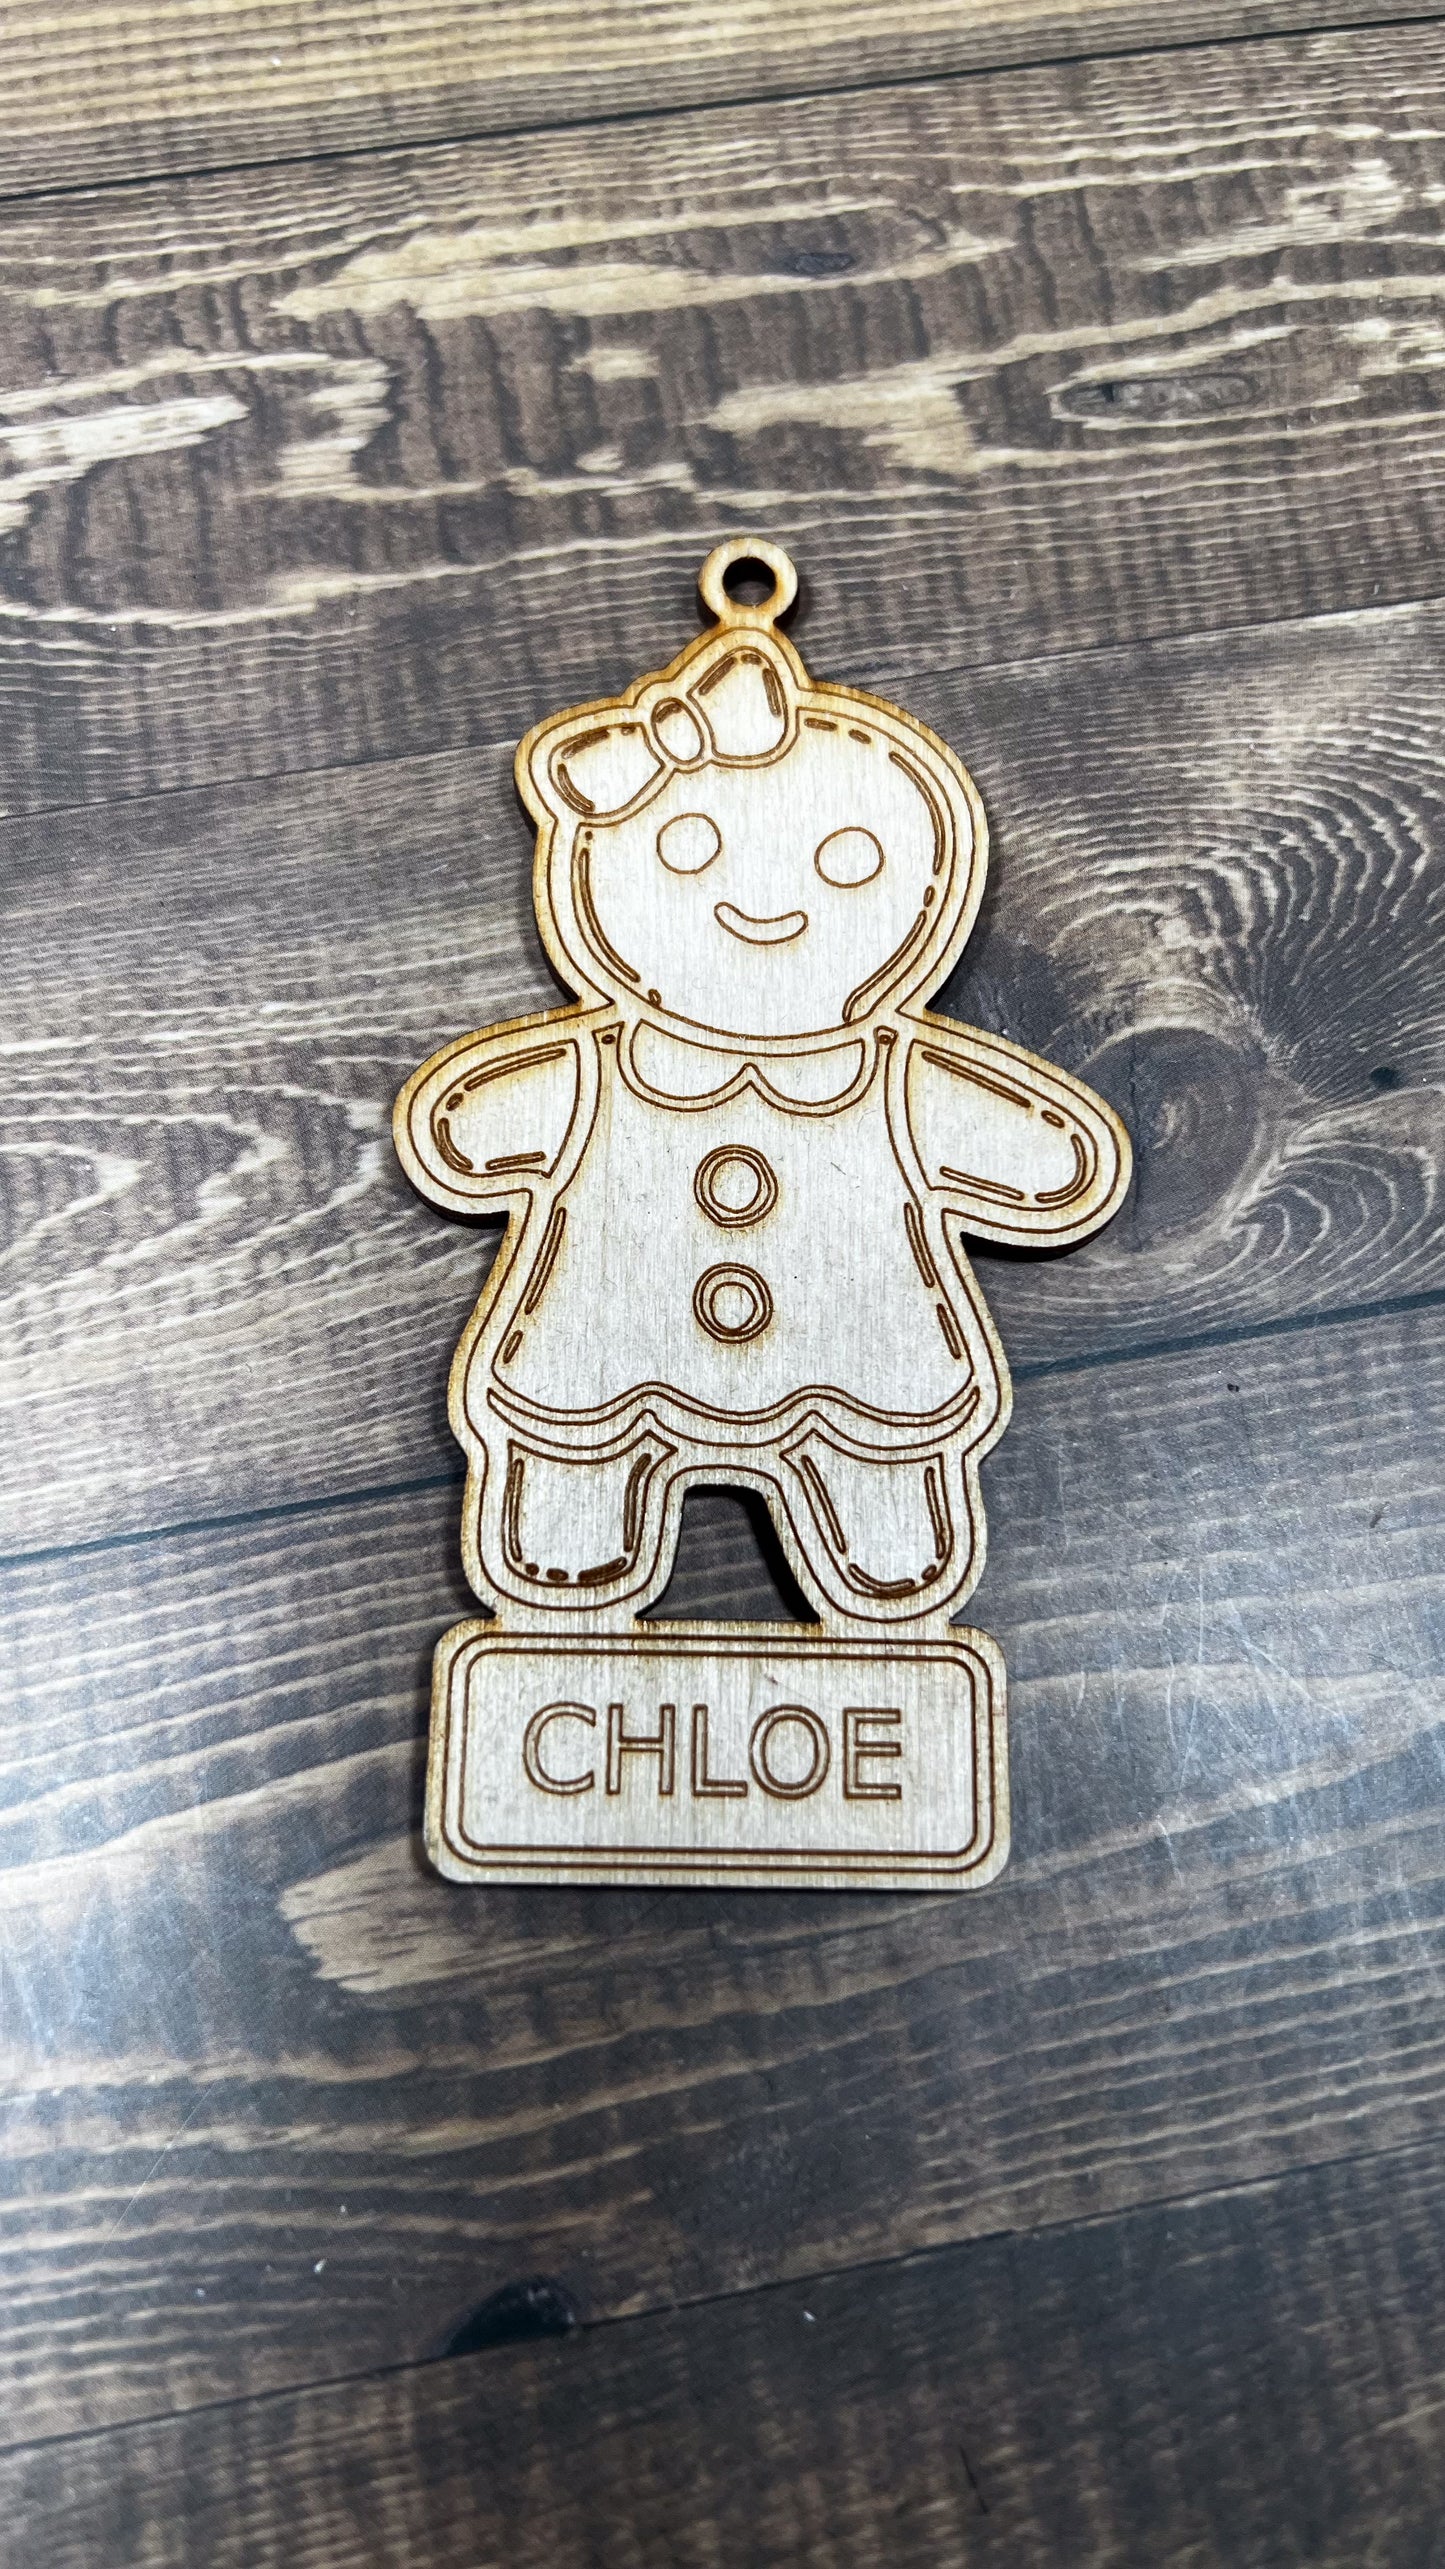 Christmas Keepsake: Laser Engraved Gingerbread Ornament - Personalize Your Gingerbread Girl or Boy - 3.5 High